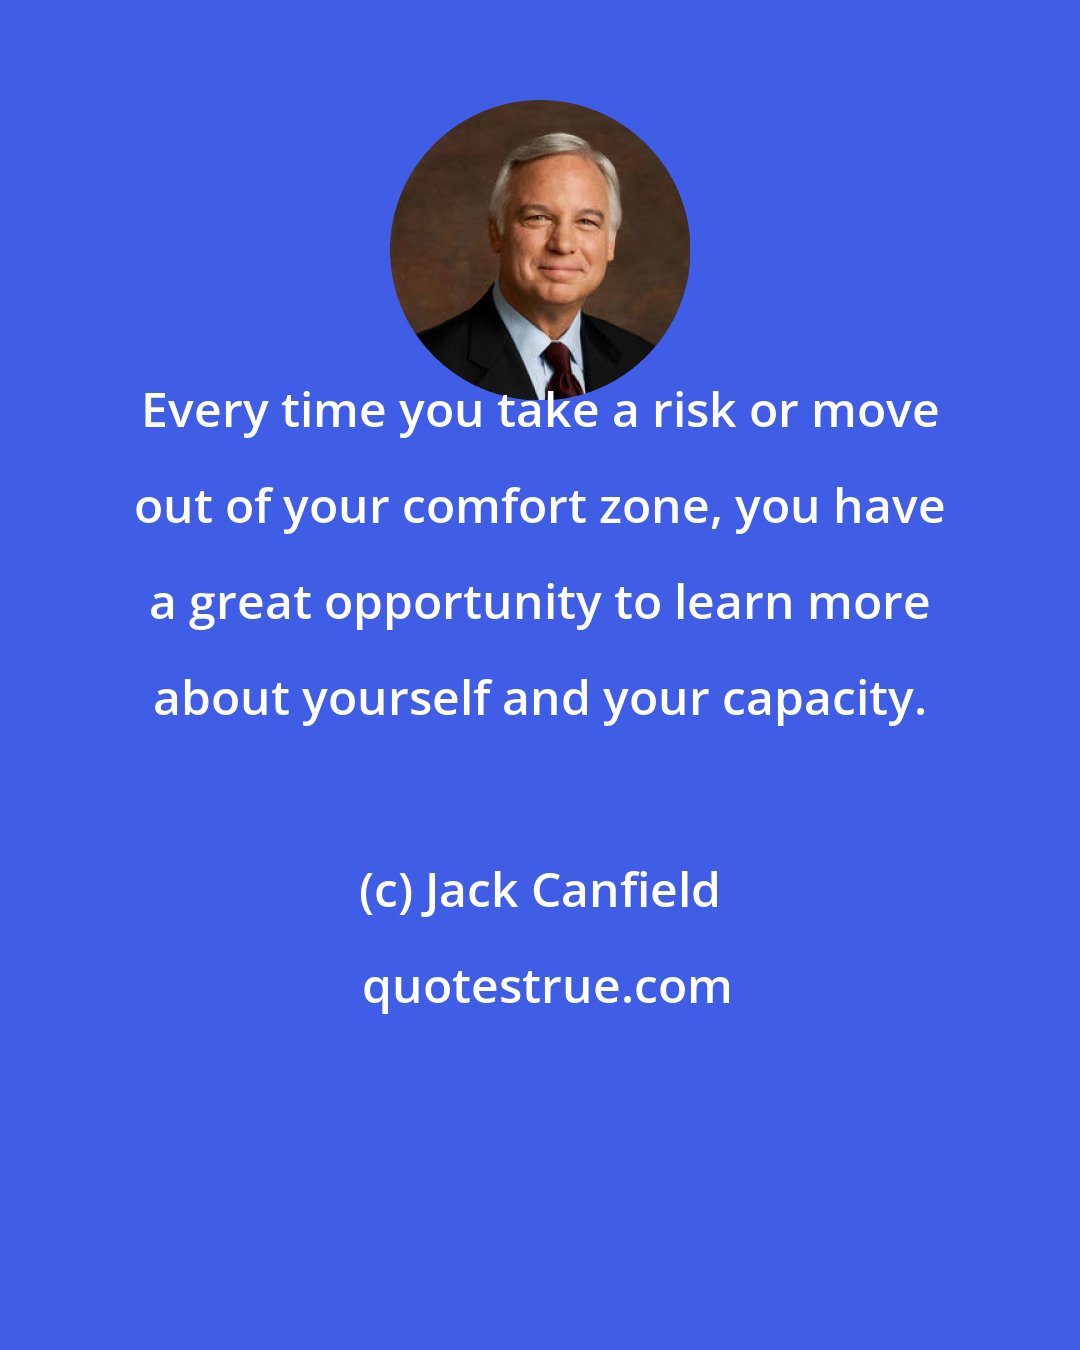 Jack Canfield: Every time you take a risk or move out of your comfort zone, you have a great opportunity to learn more about yourself and your capacity.